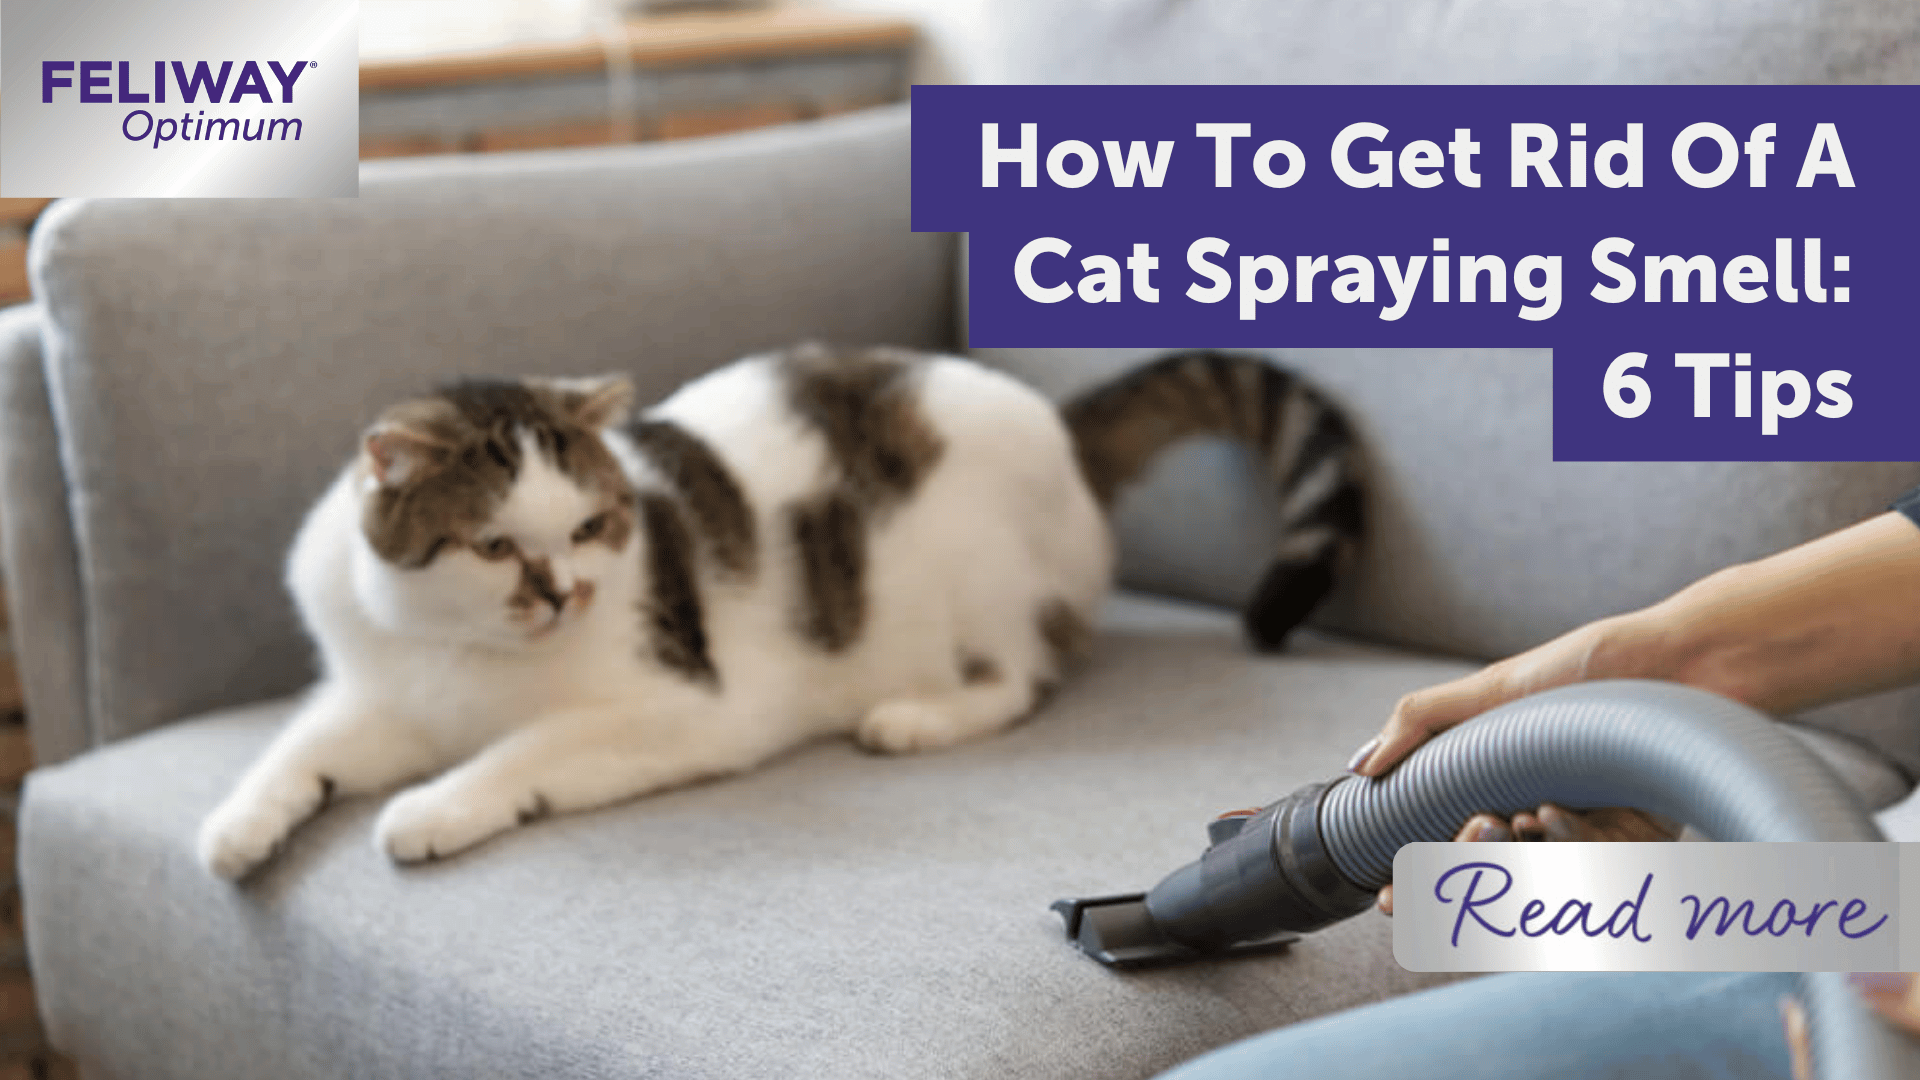 How To Get Rid Of A Cat Spraying Smell: 6 Tips